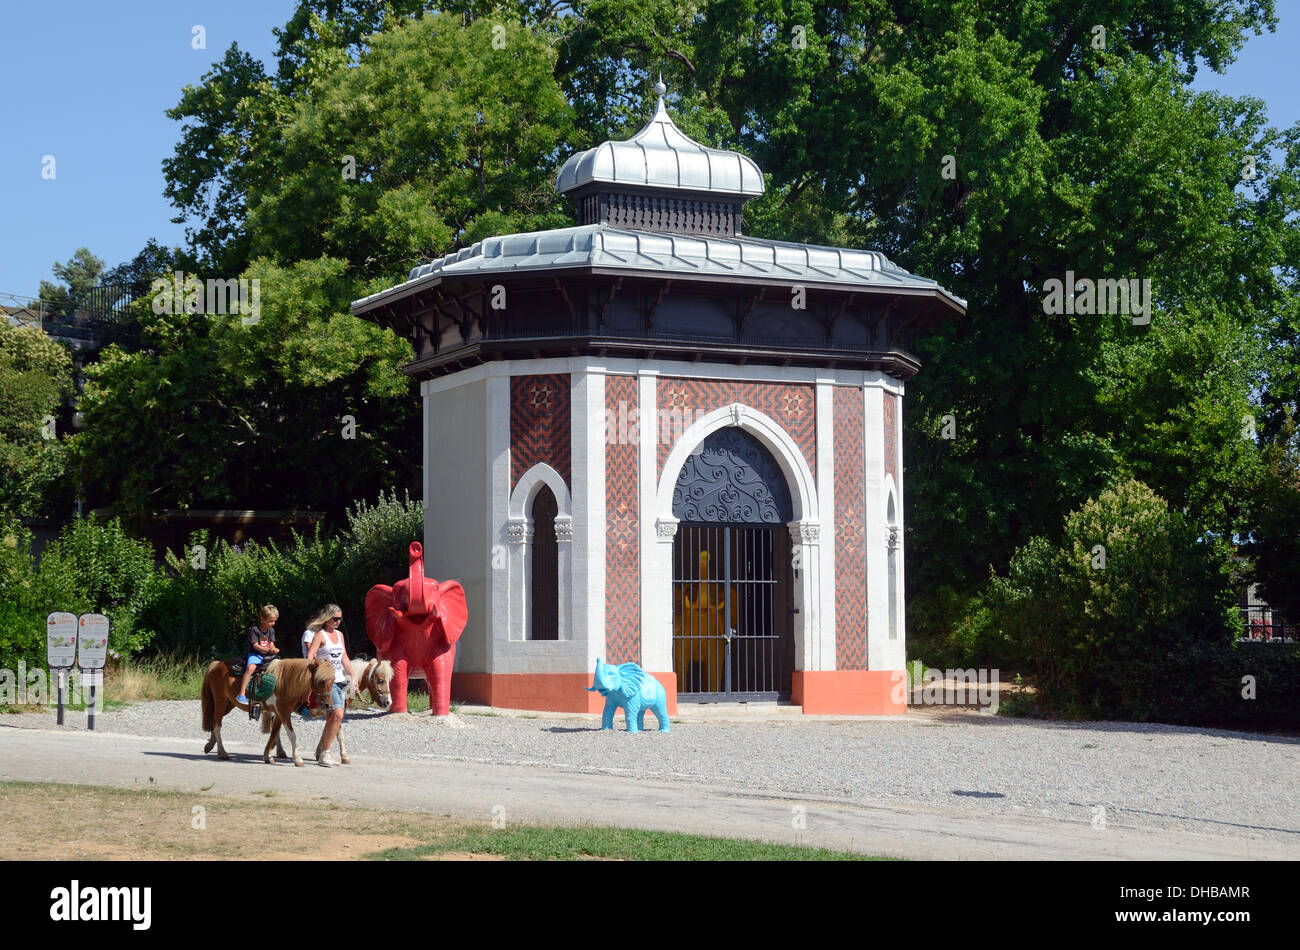 Oriental-Style or Mughal Style Elephant House, Animal House or Kiosk in the former Marseille Zoo in the Grounds of Palais de Longchamp Gardens France Stock Photo